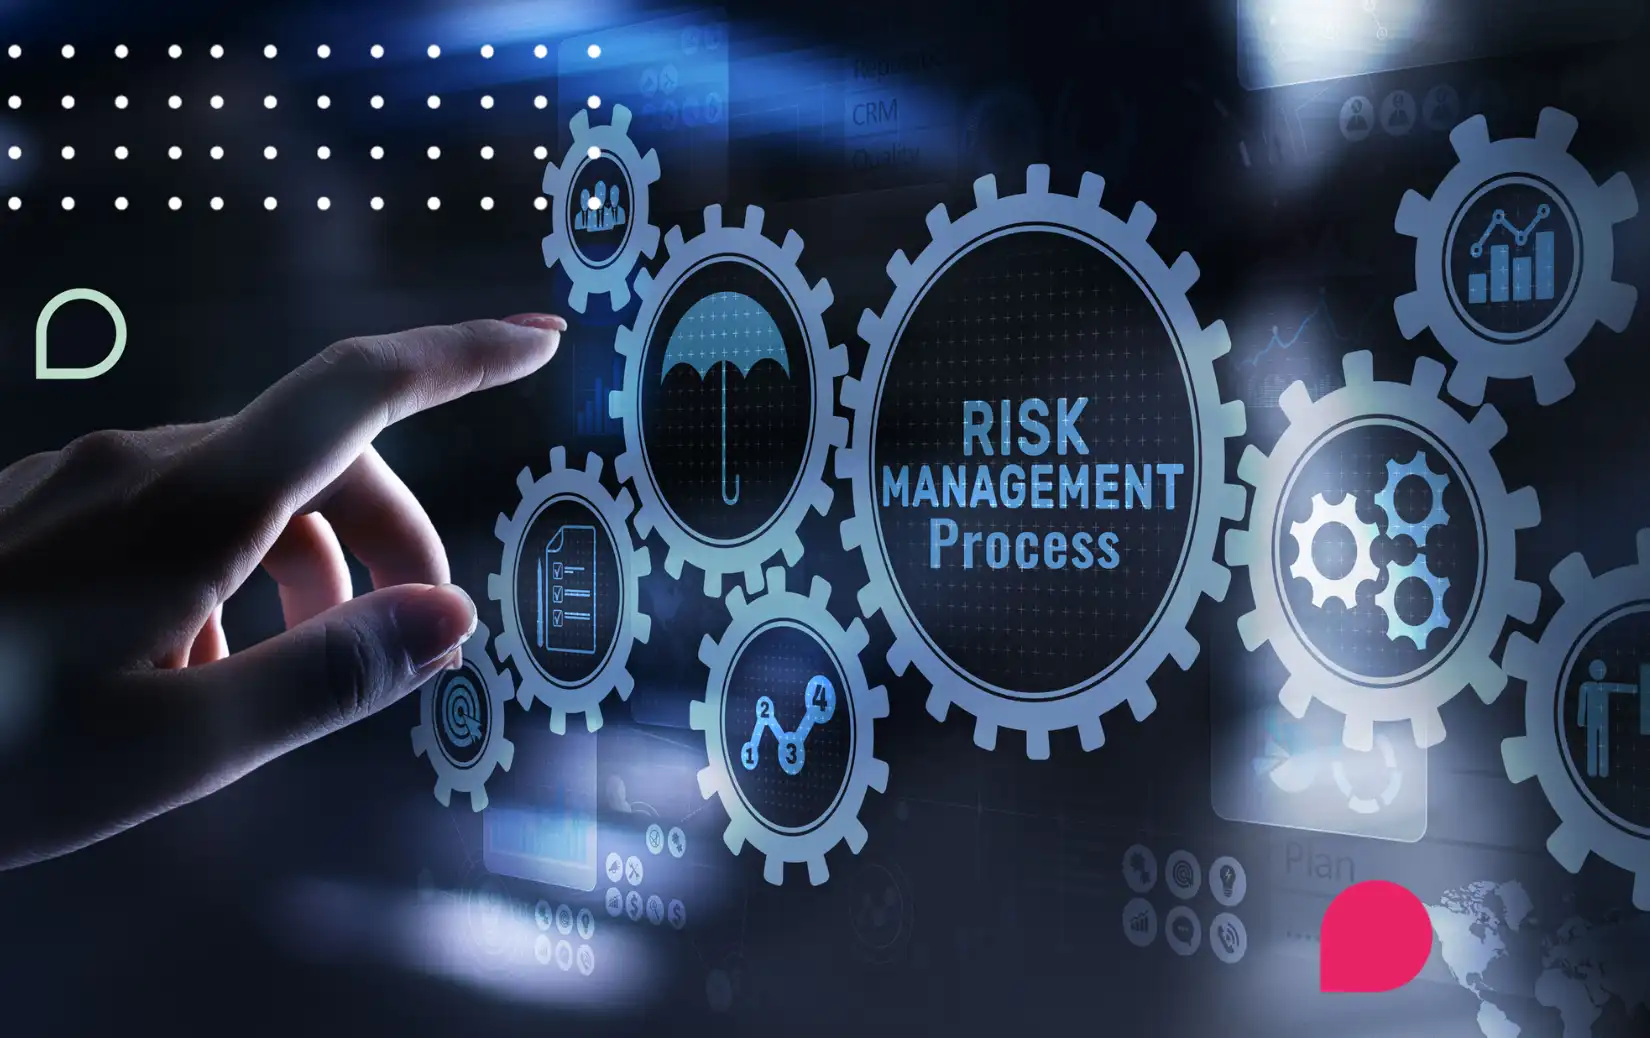 what is Risk Management Process?